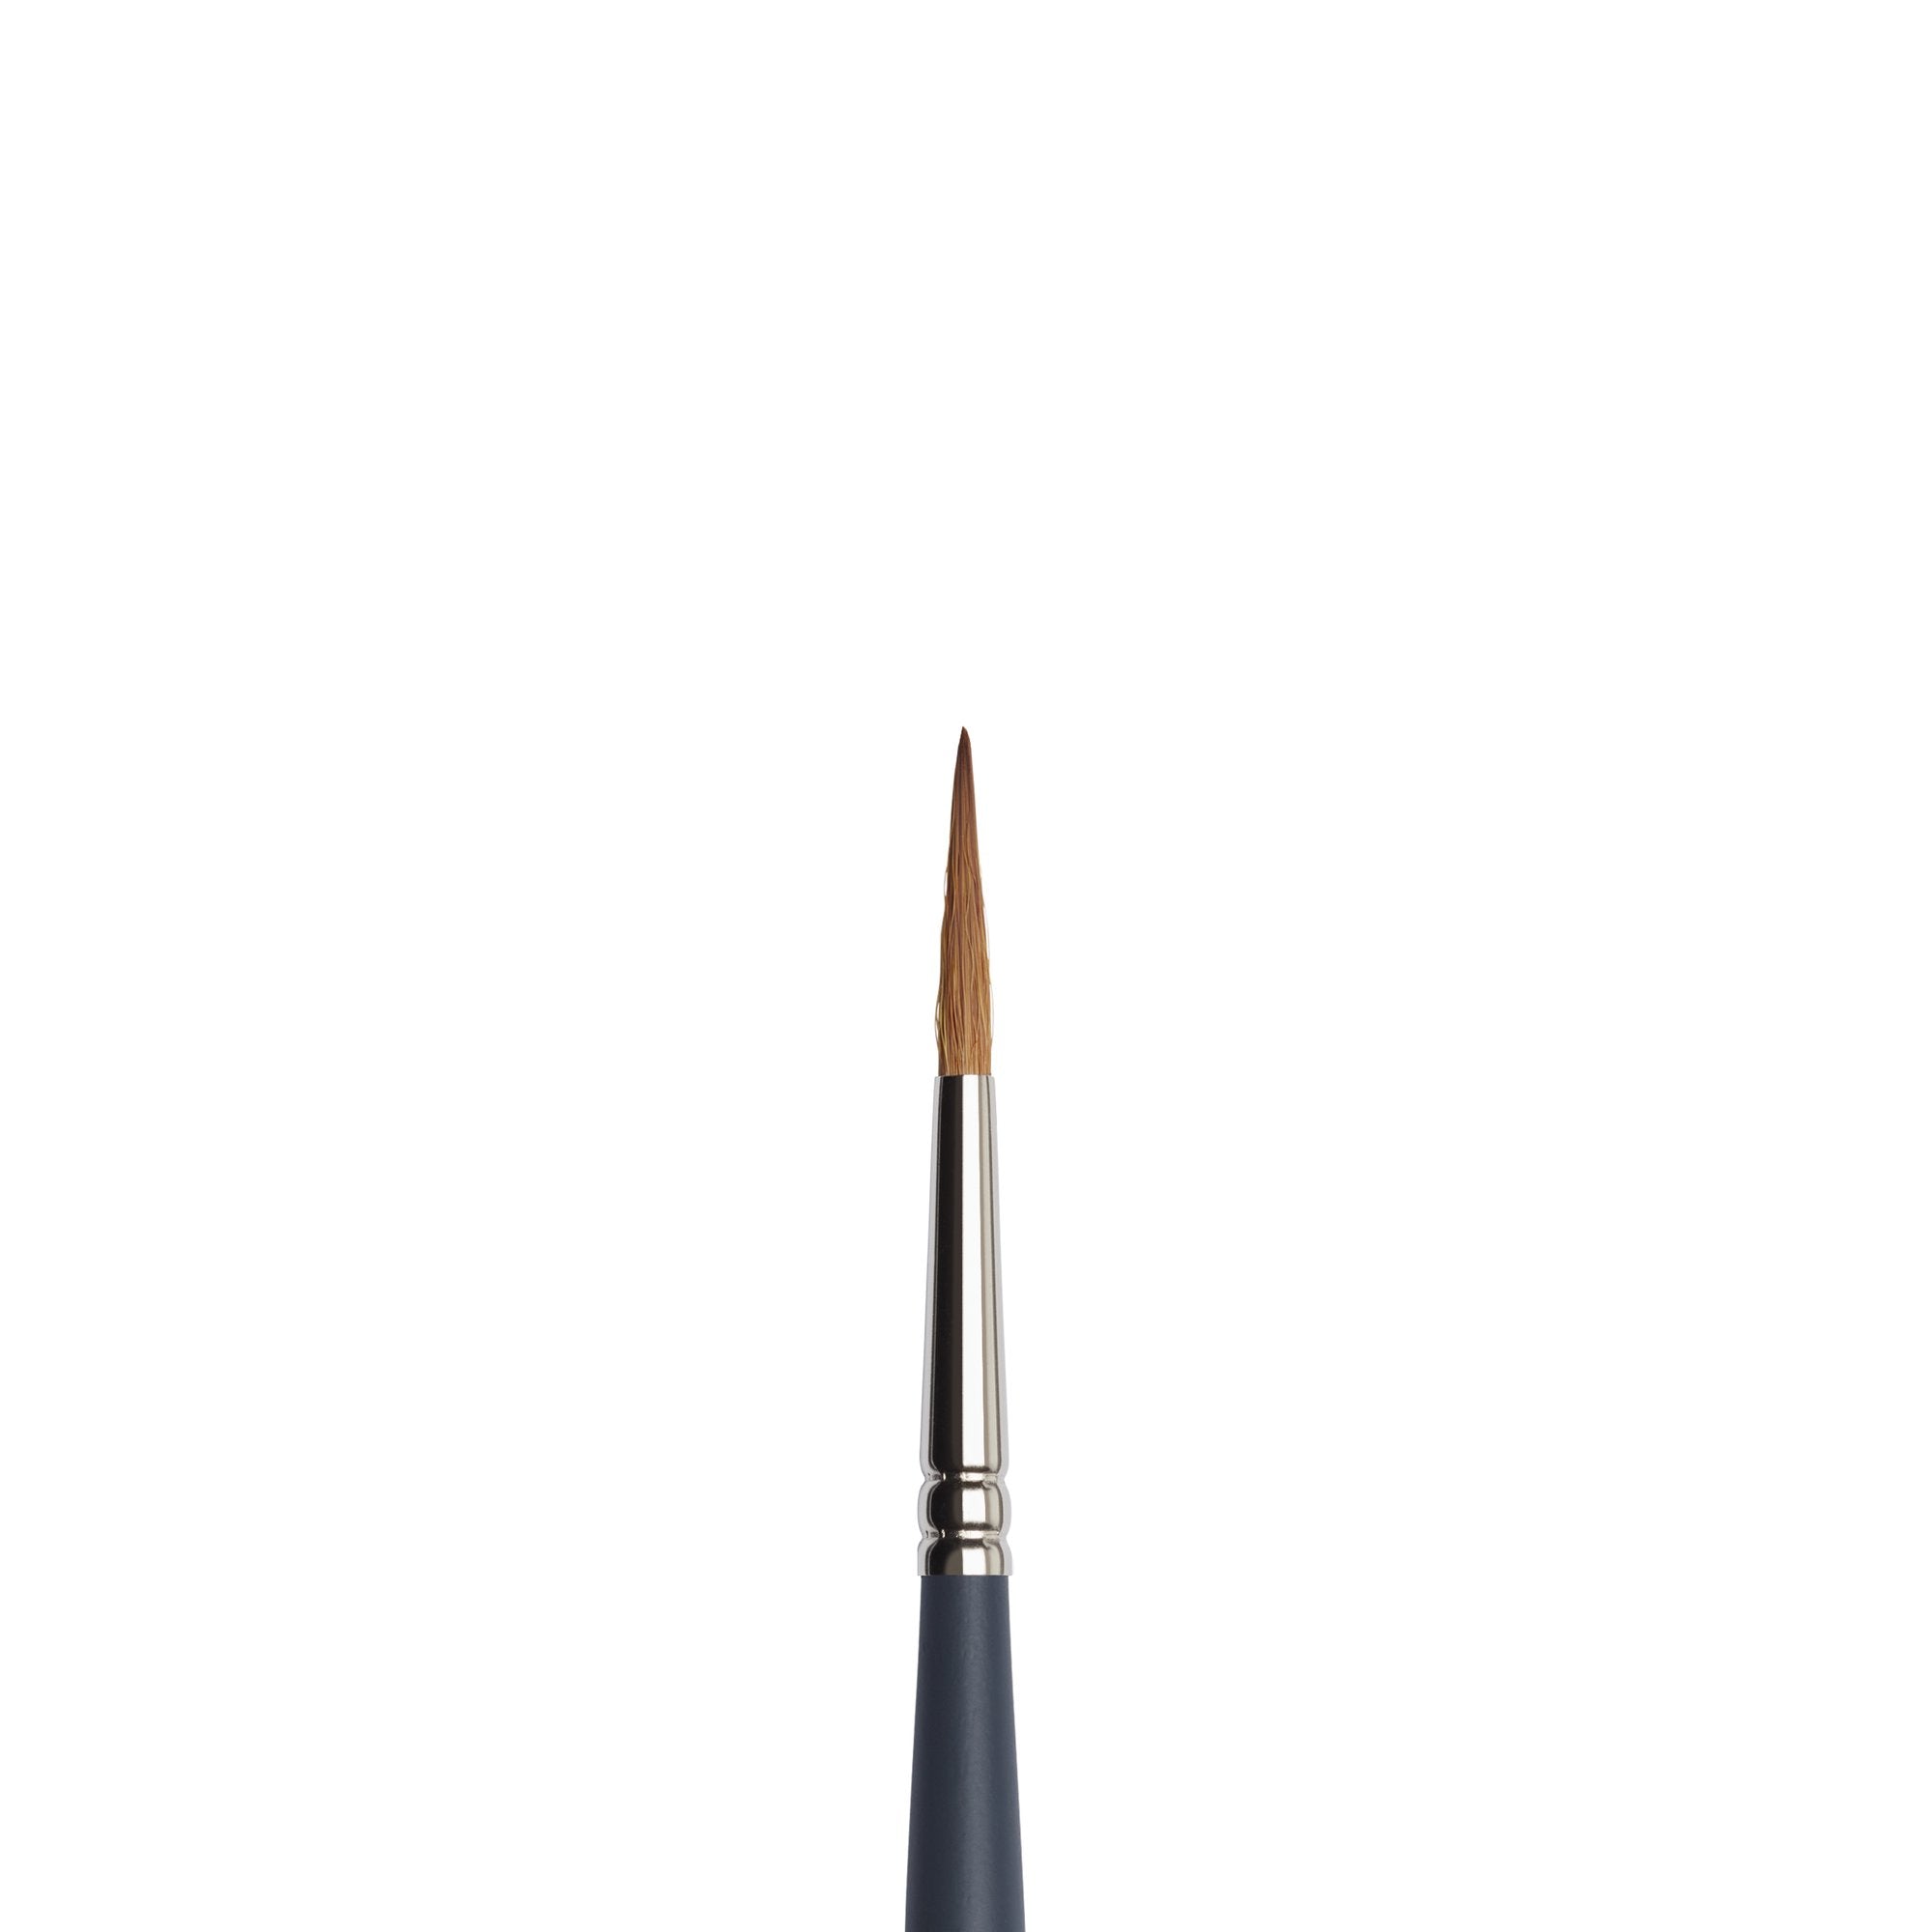 Winsor & Newton Professional Watercolour Sable Brush, Pointed Round #3